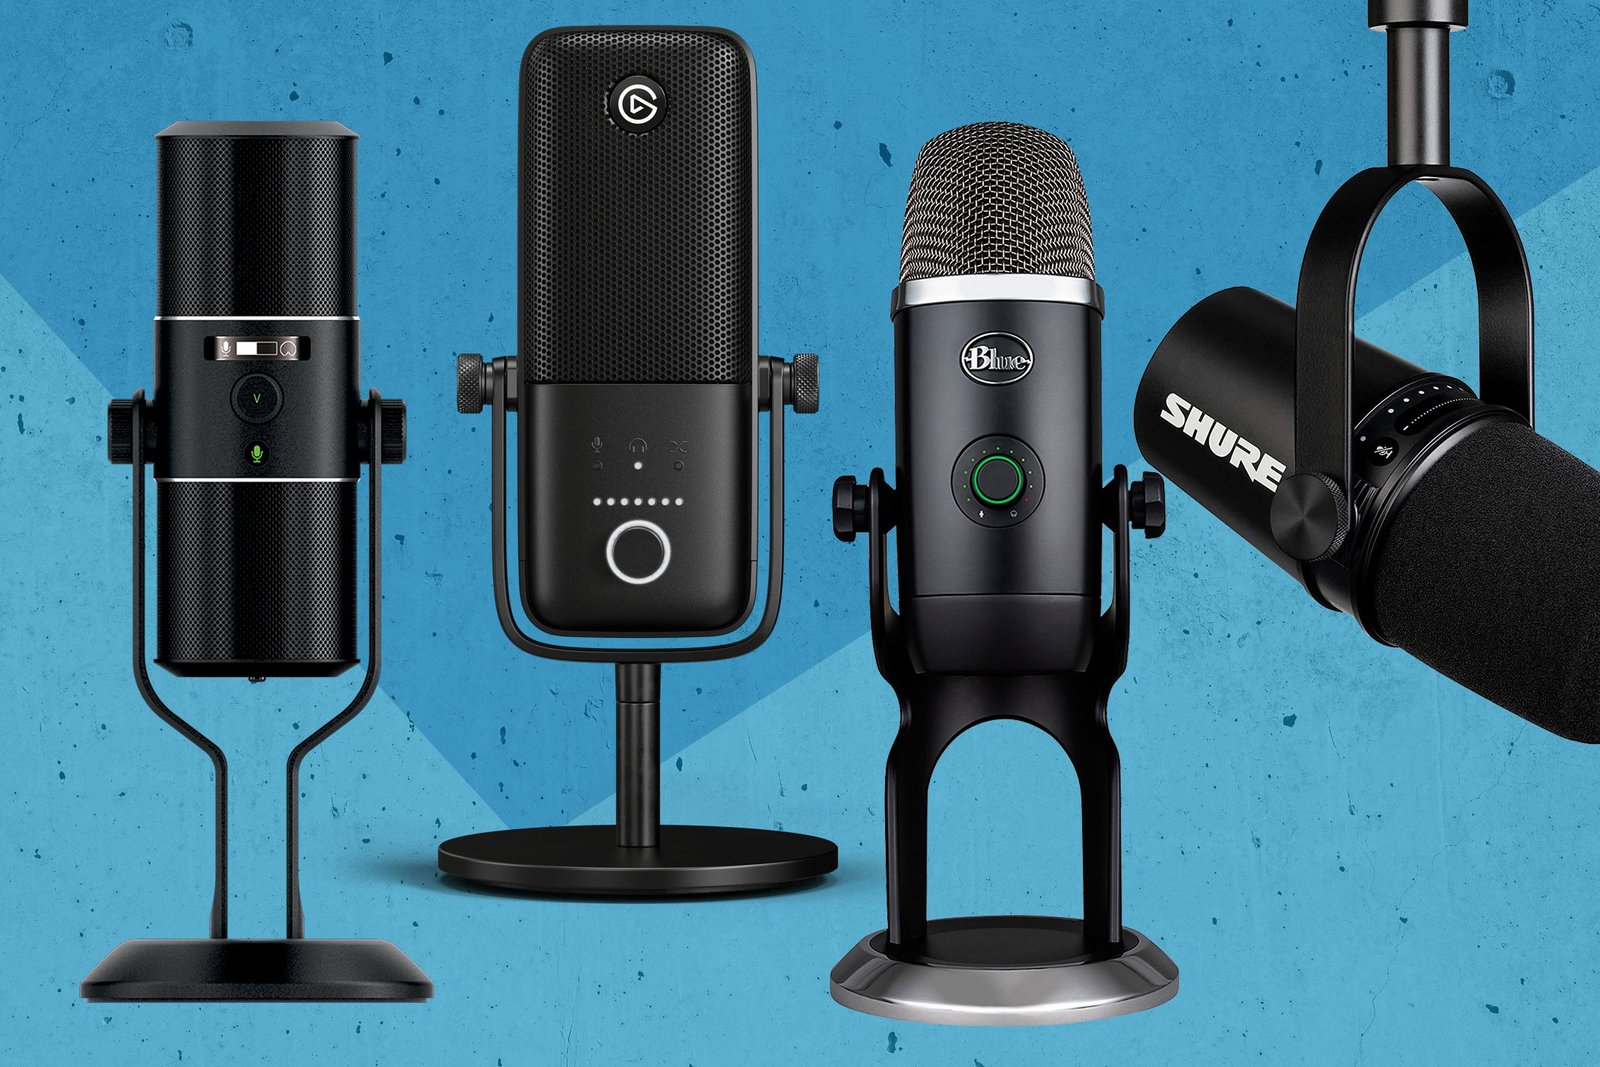 Easiest USB microphones for streaming: Upgrade your circulate with fine quality audio